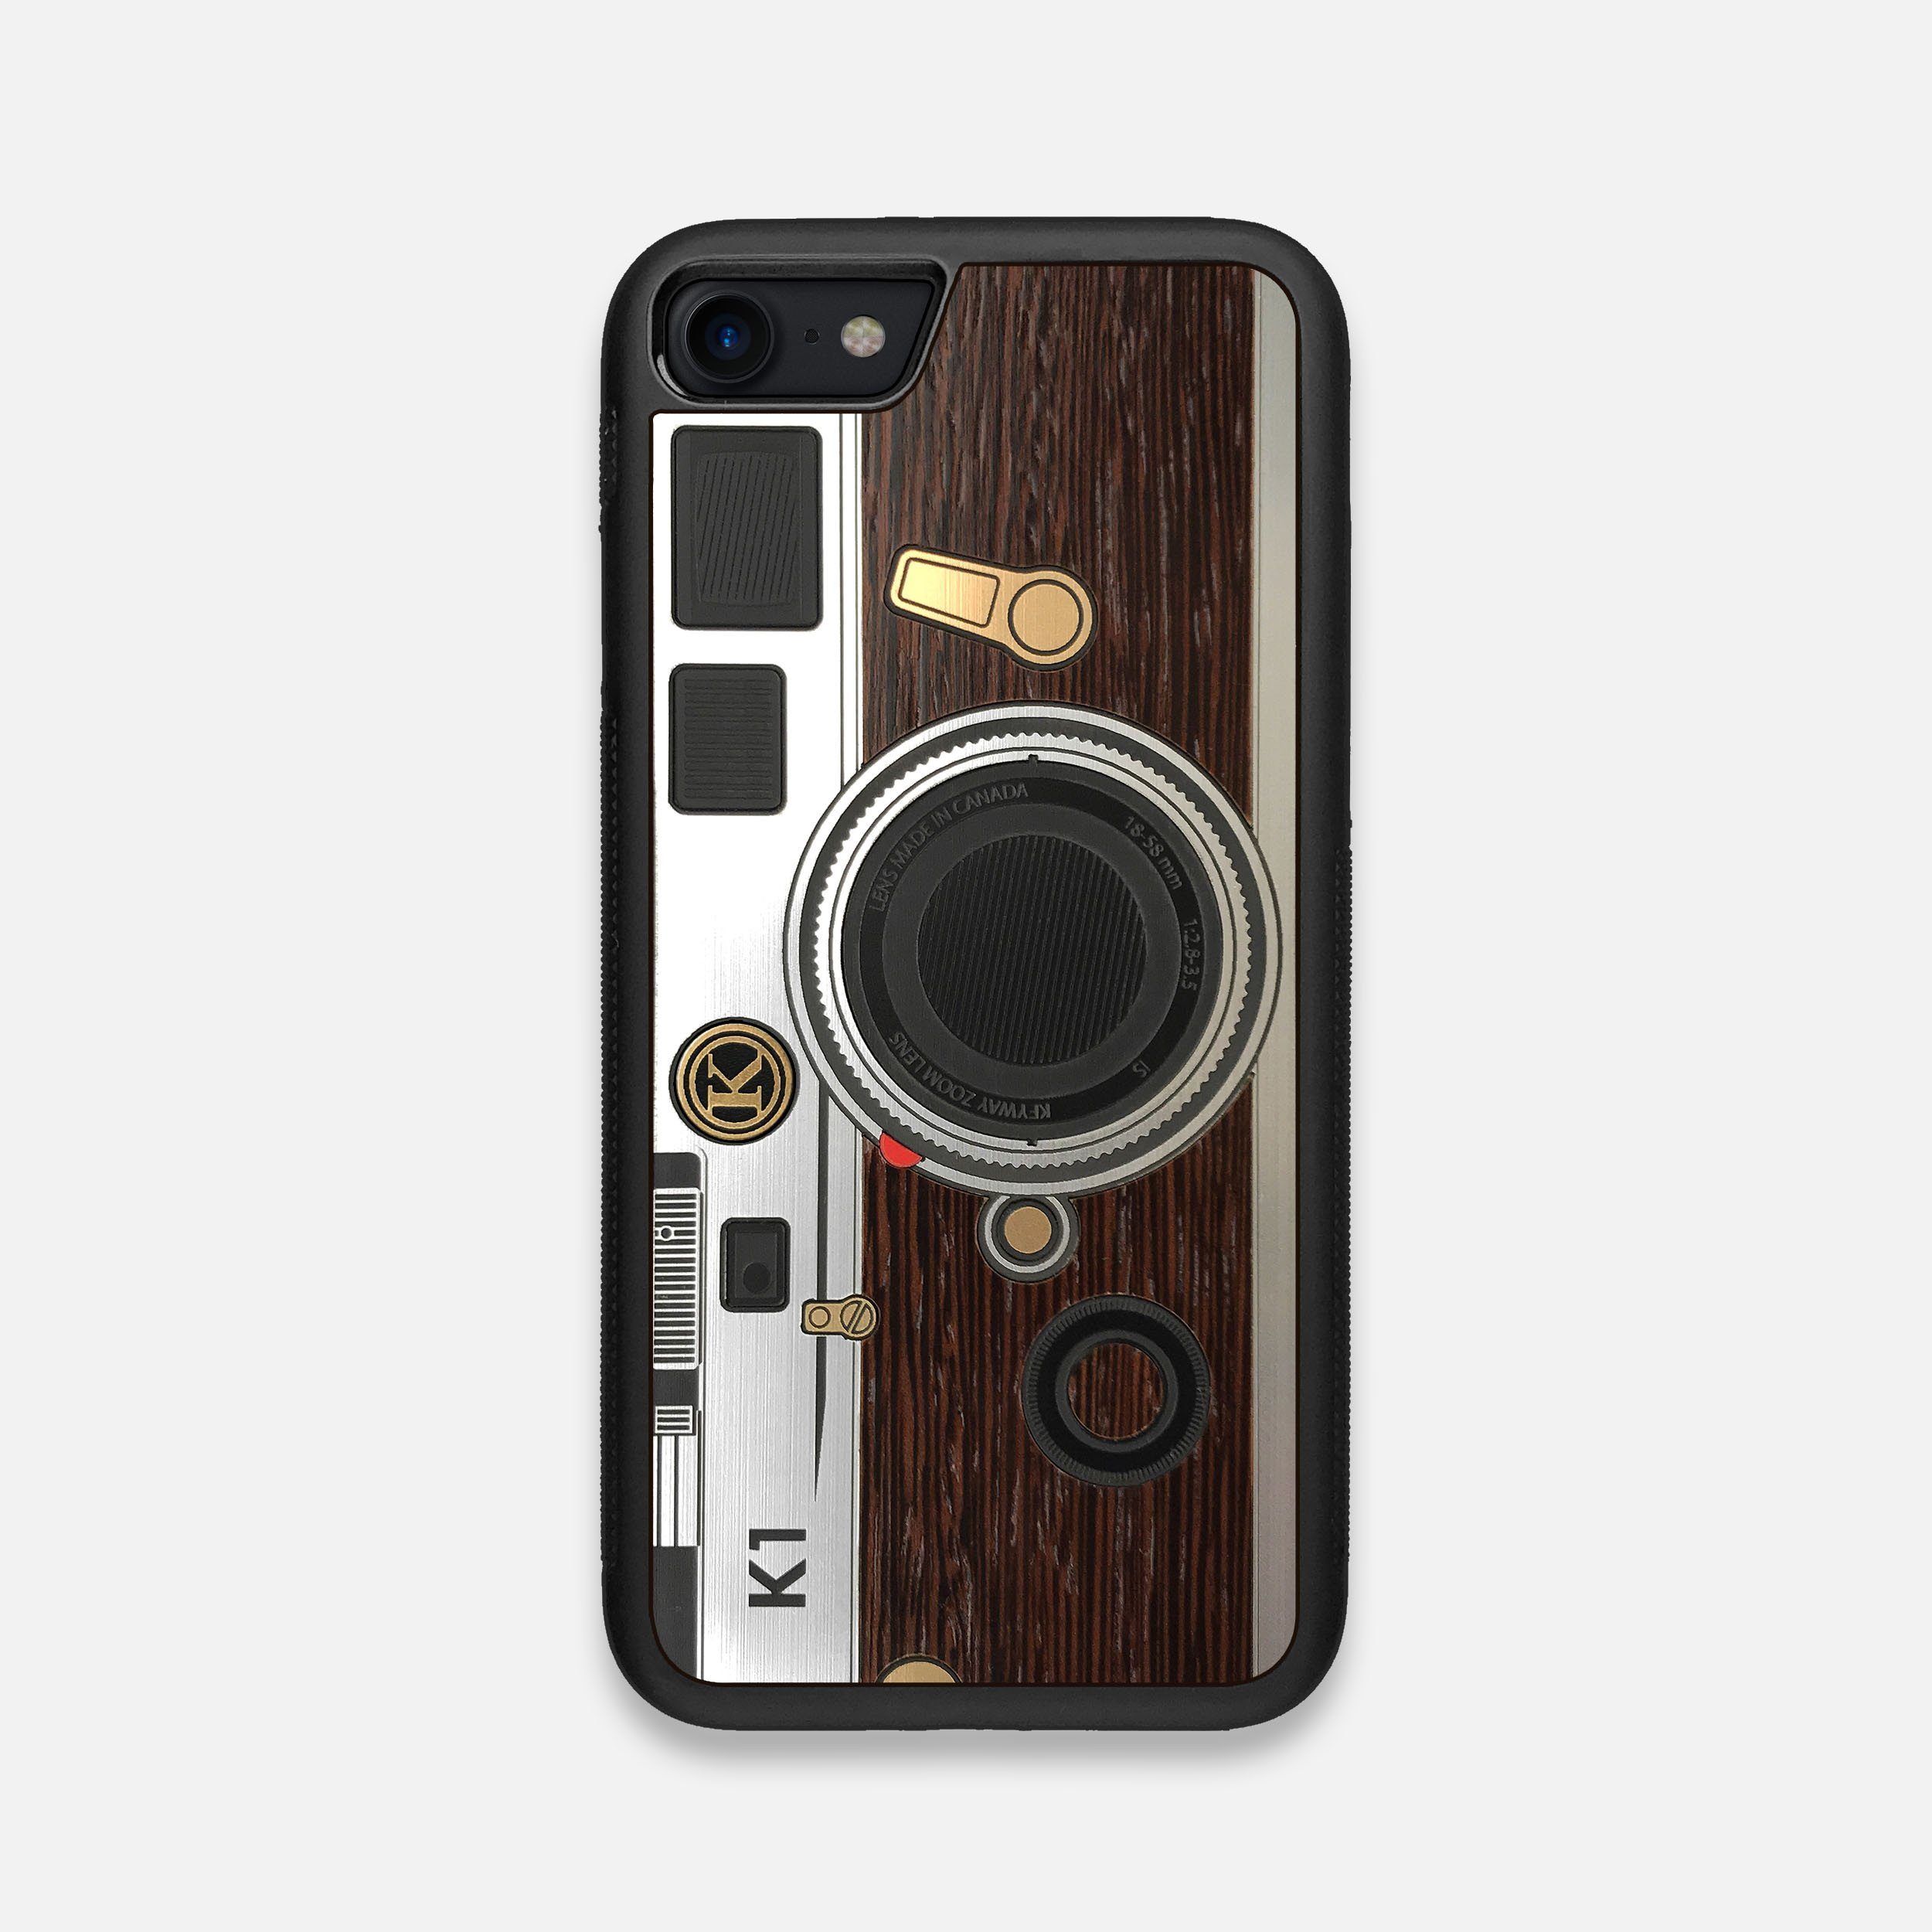 Front view of the classic Camera, silver metallic and wood iPhone 7/8 Case by Keyway Designs